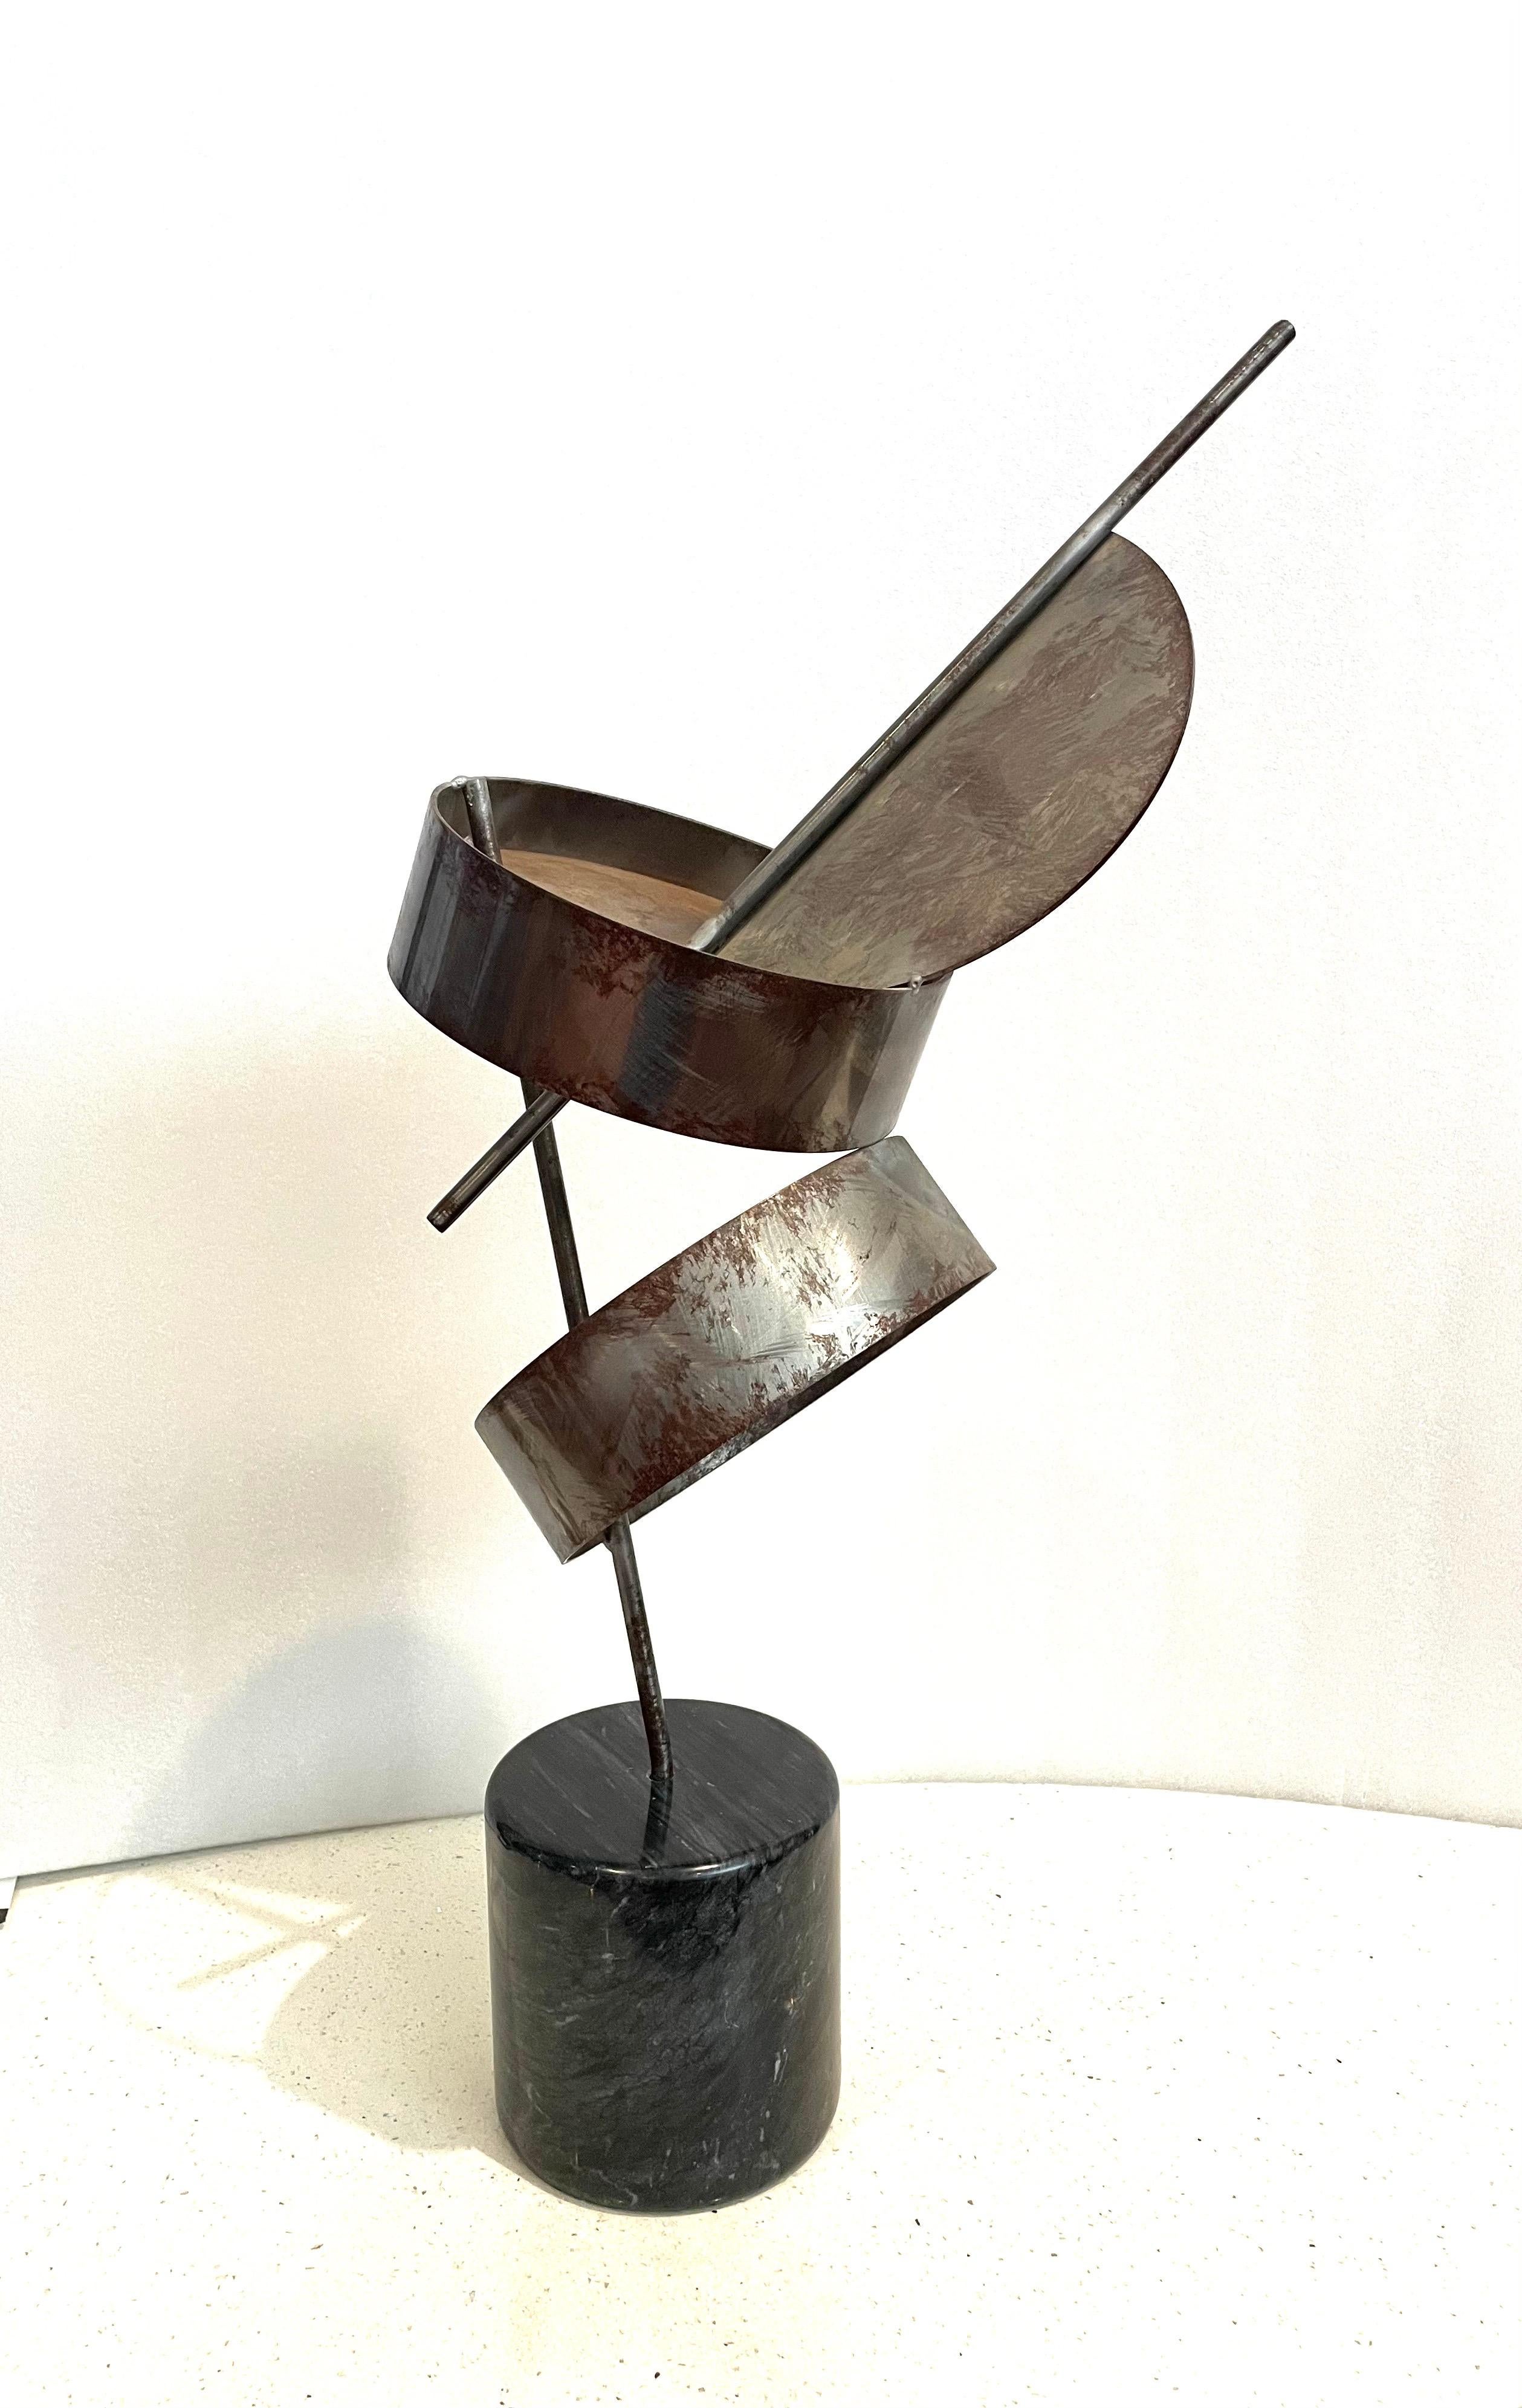 Nice and rare sculpture by Curtis Jere, circa 1990 signed and dated, solid raw steel with original patina and oxidation, sitting on solid marble cylinder base.